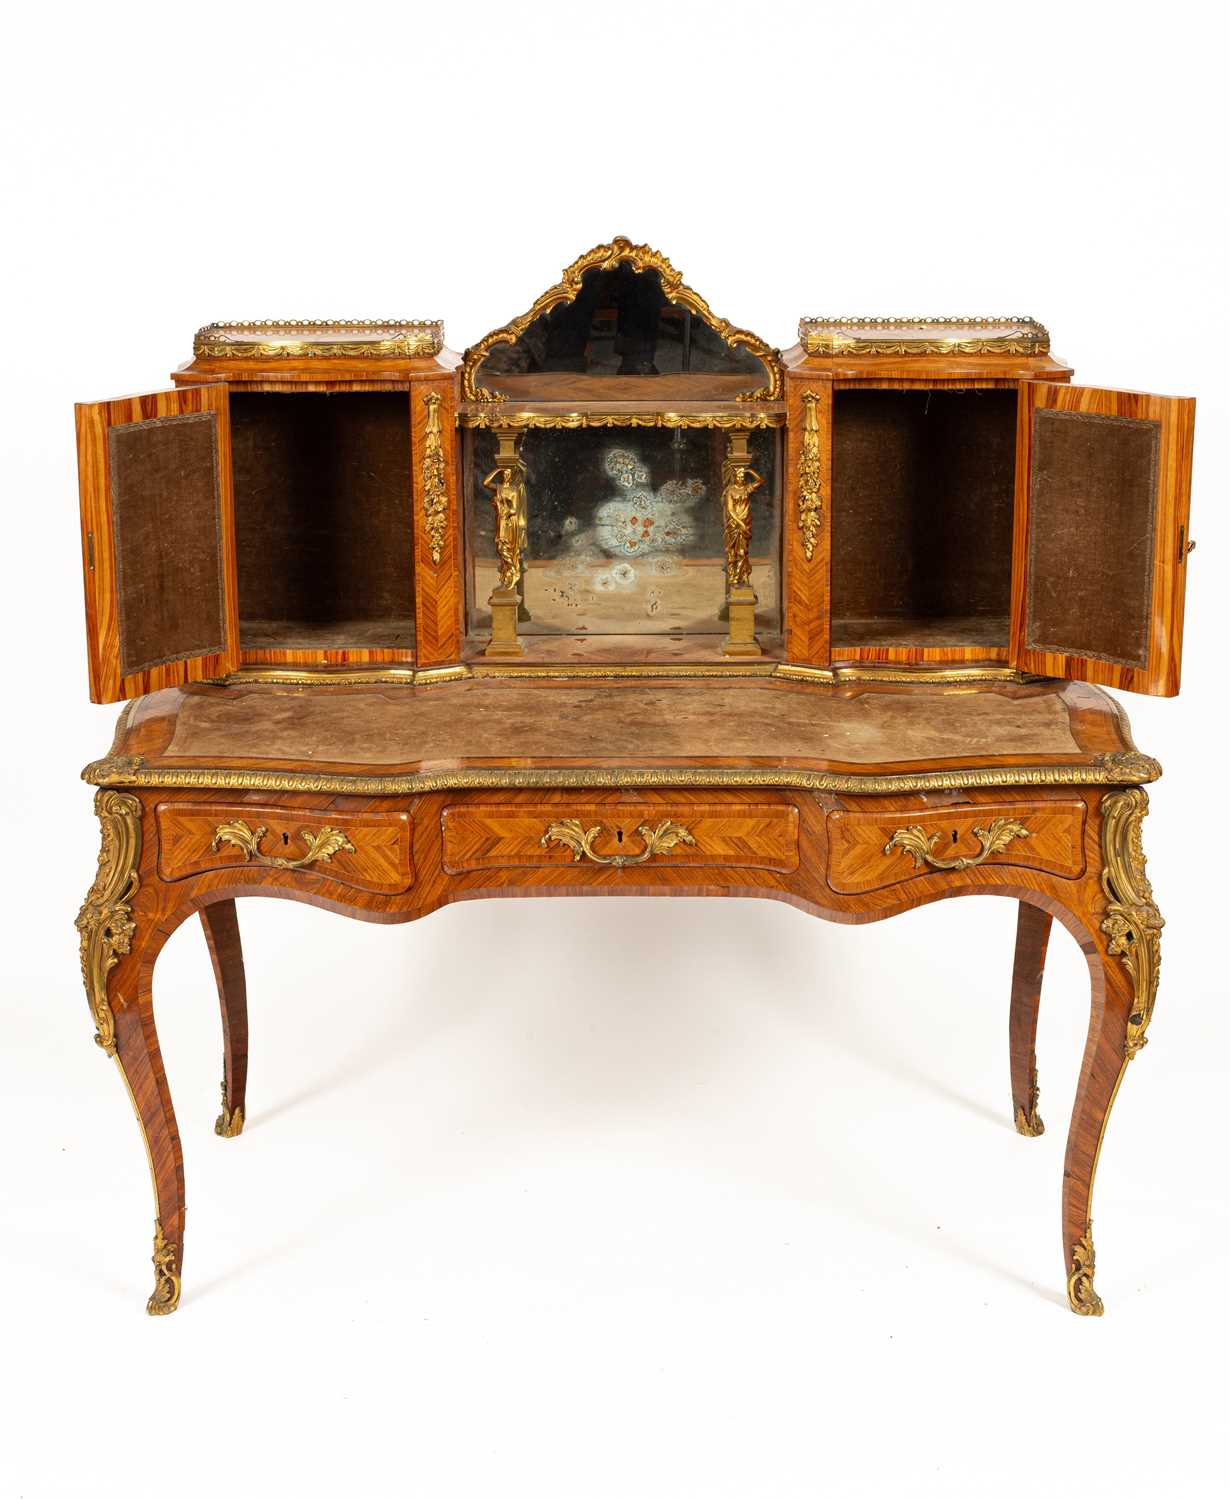 A Victorian ormolu mounted tulipwood and kingwood desk in the Louis XV style - Image 3 of 38